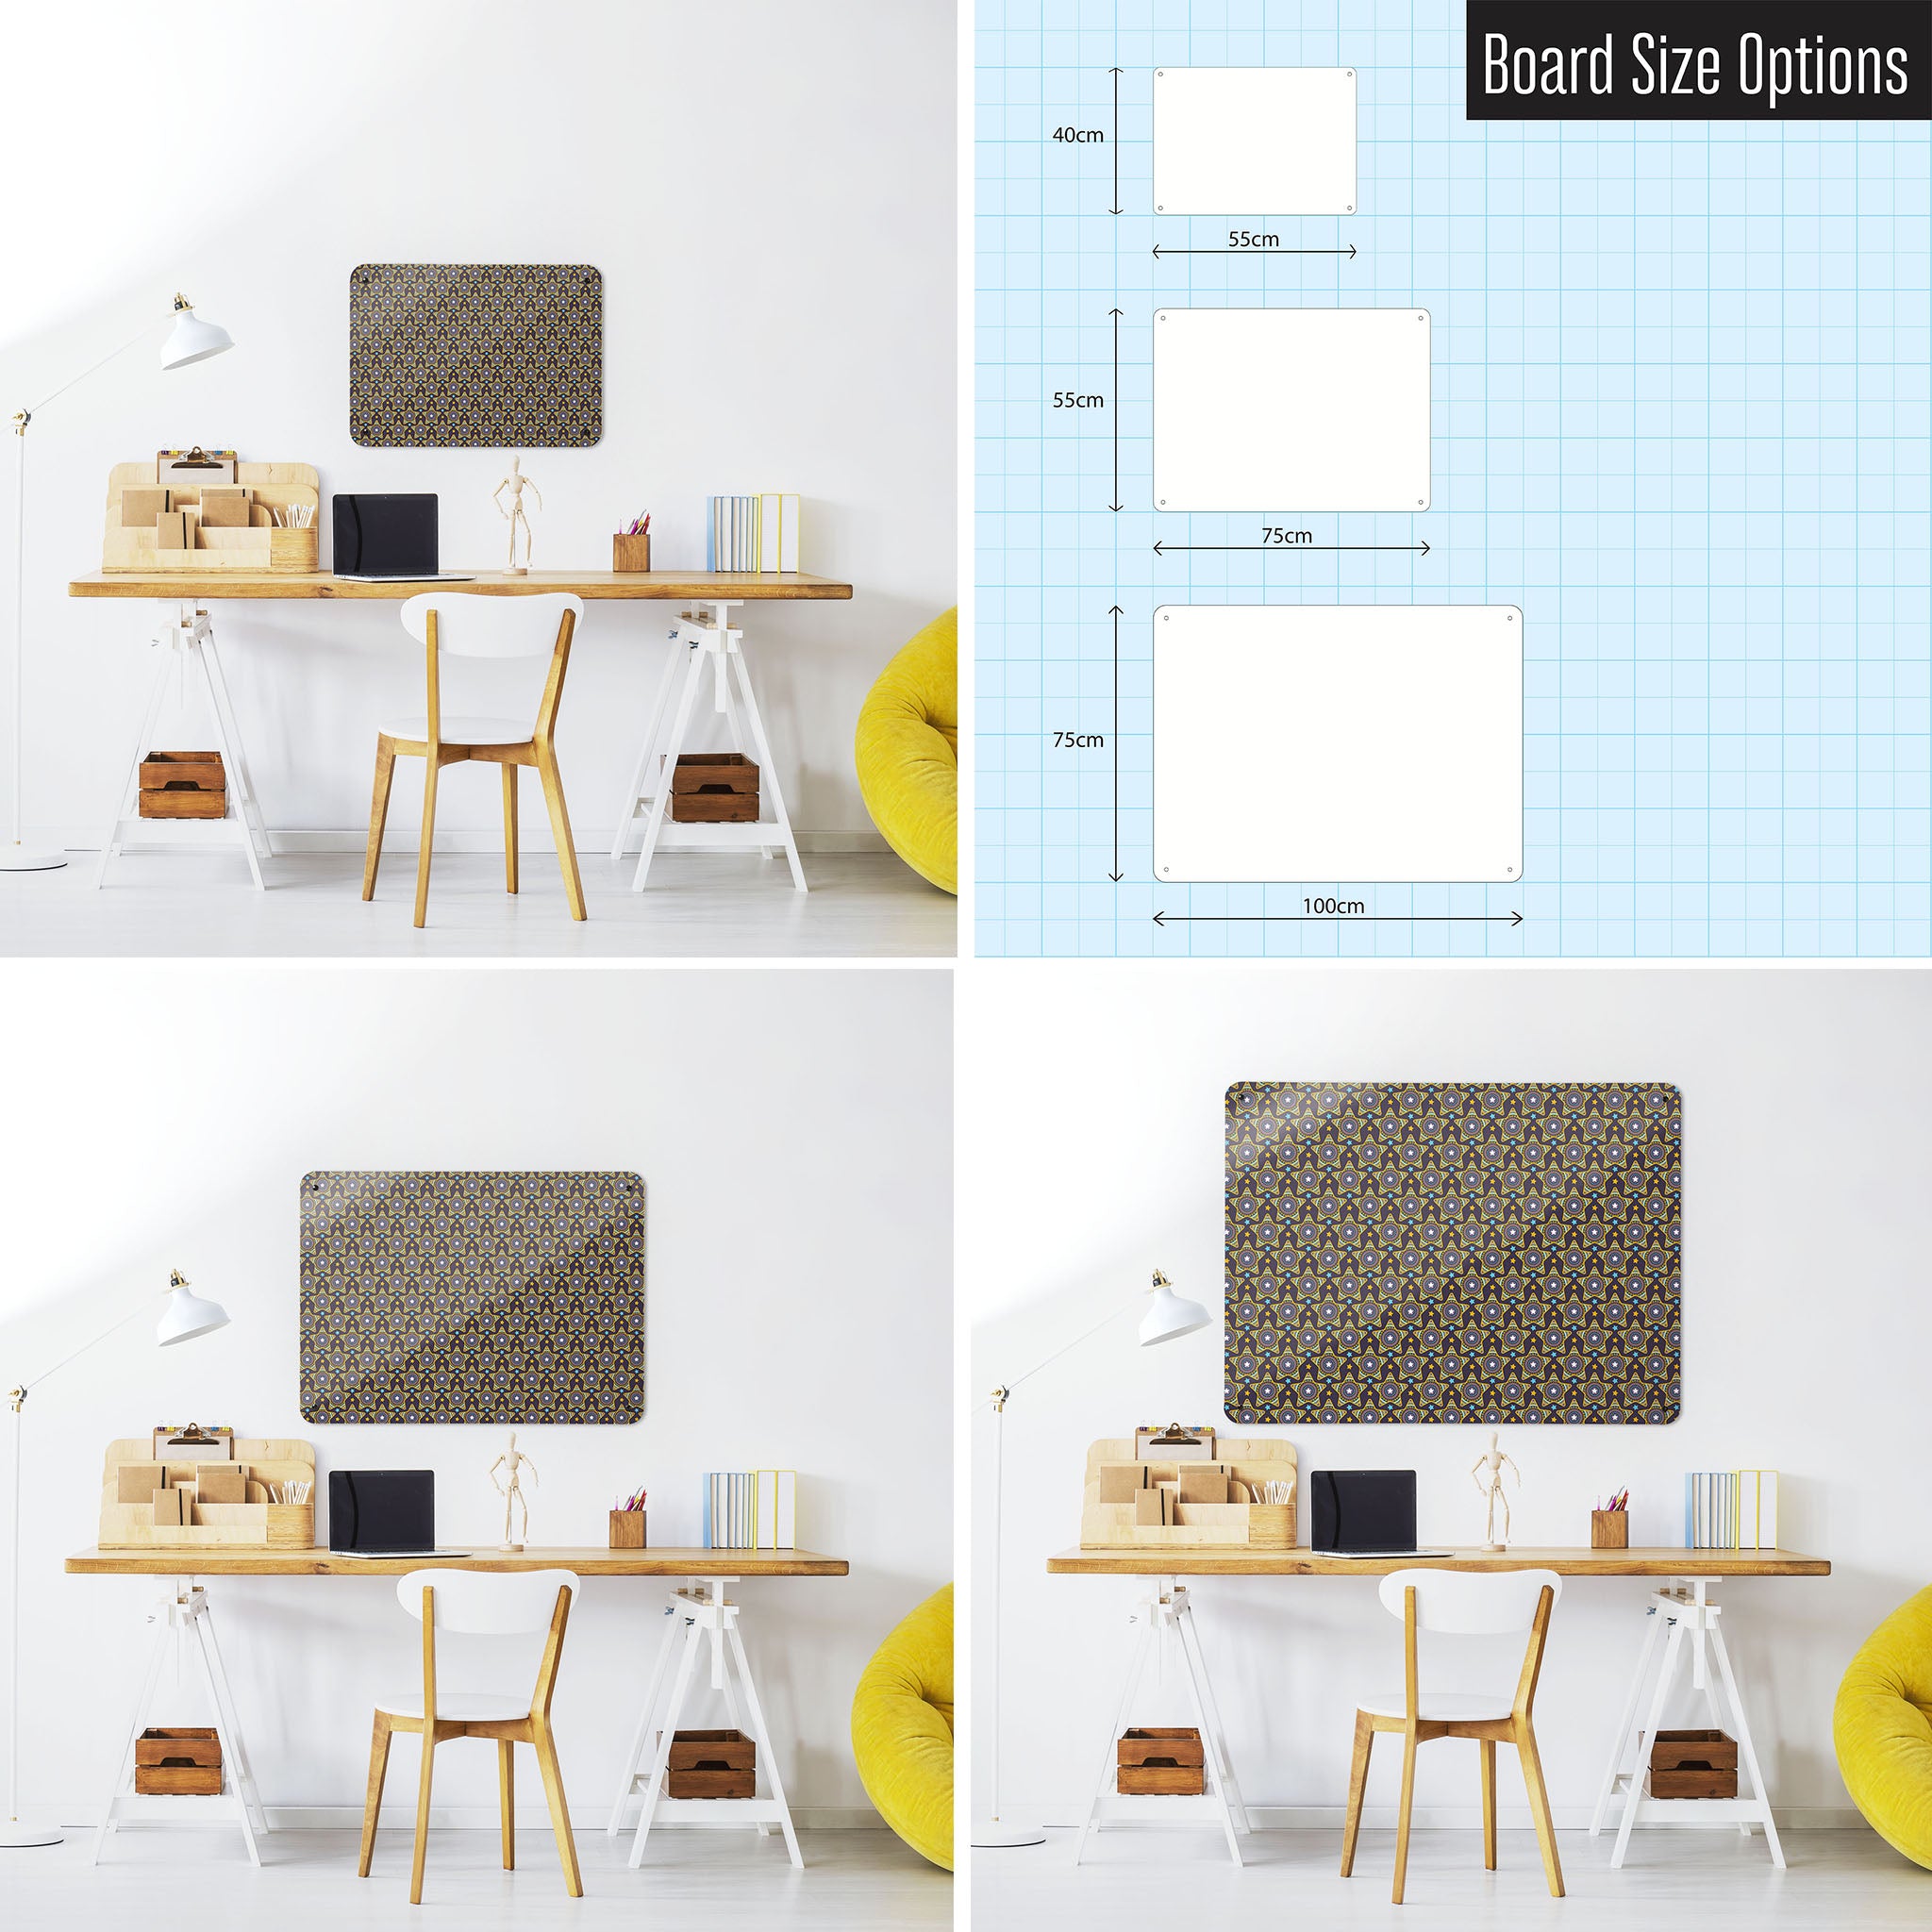 Three photographs of a workspace interior and a diagram to show size comparisons of a stars on purple design magnetic notice board